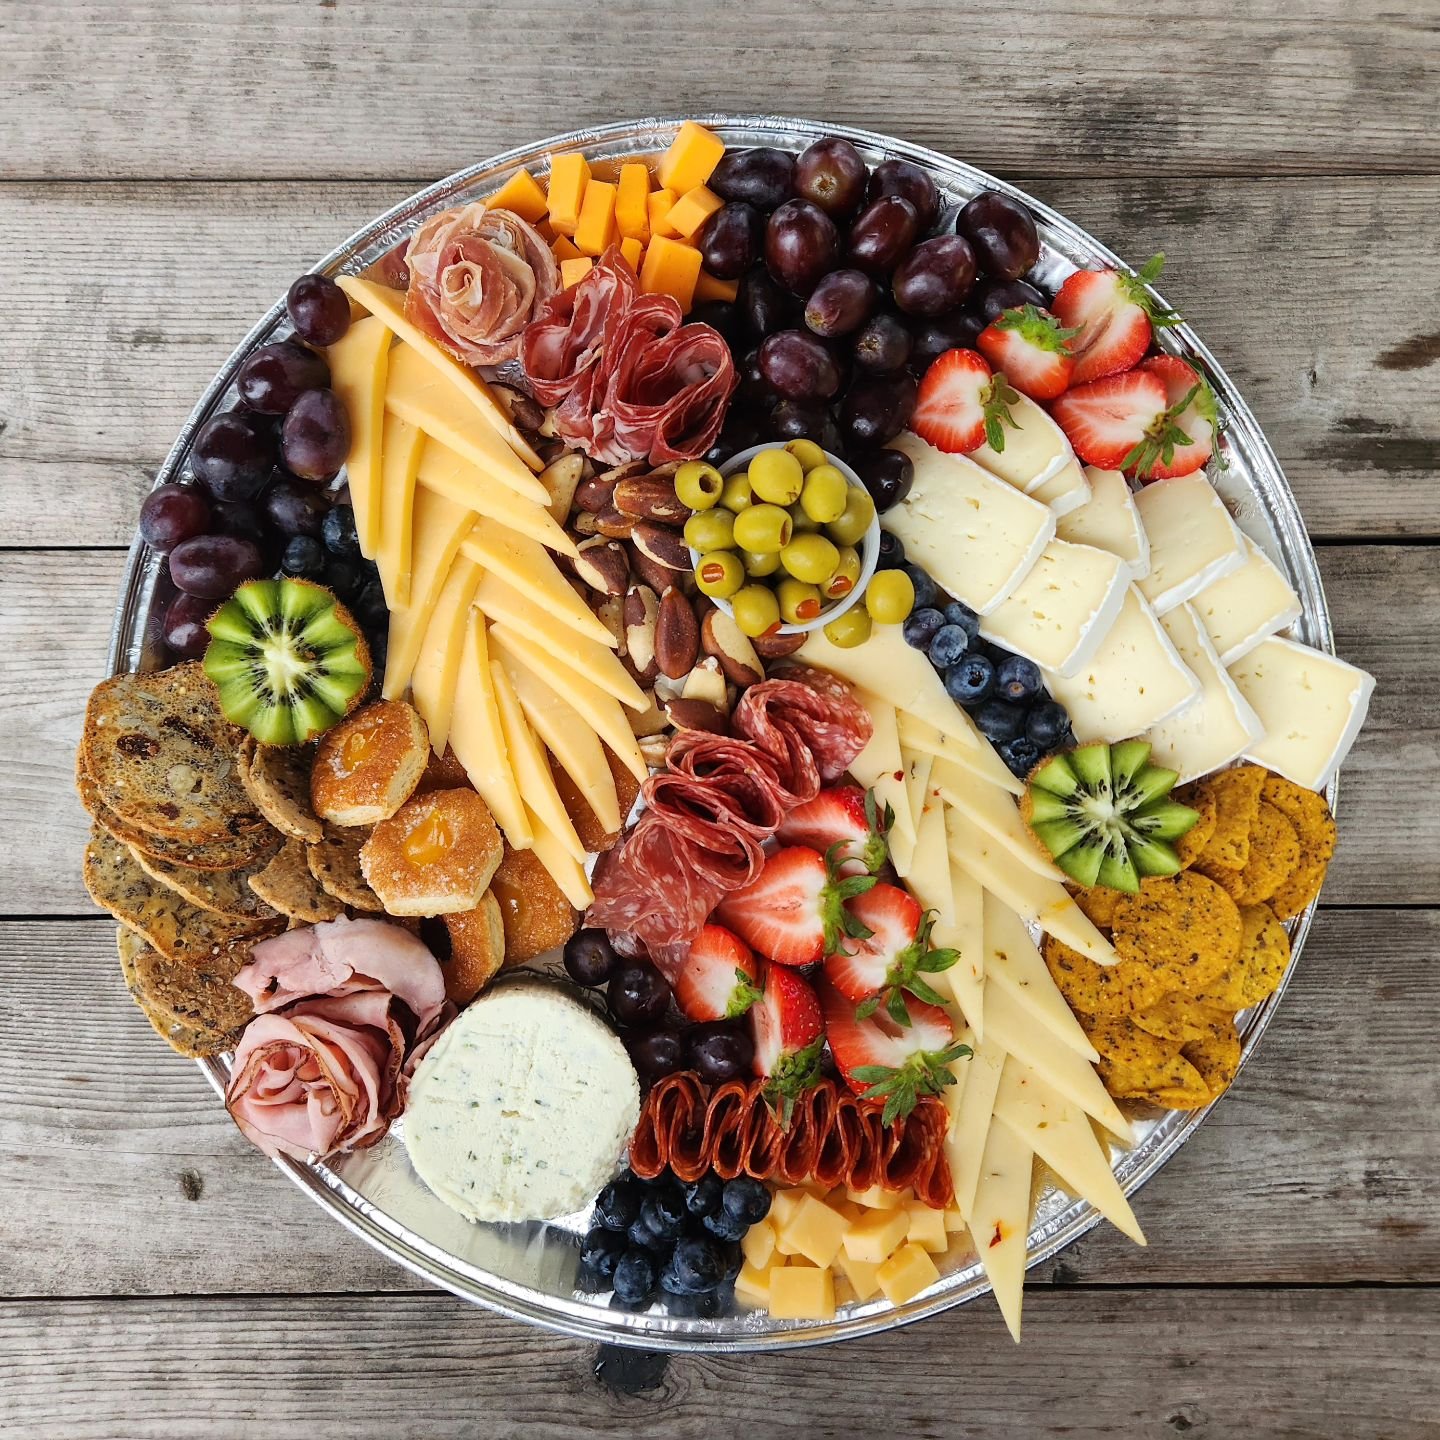 Charcuterie Boards for CATERINGS

#cateringservices #cateringevent #corporatecatering #corporatelunch #breakfastcatering #fingerfoods #fingerfoodcatering #mississaugafood #mississaugaeats #Mississauga #etobicokefood #etobicokeeats